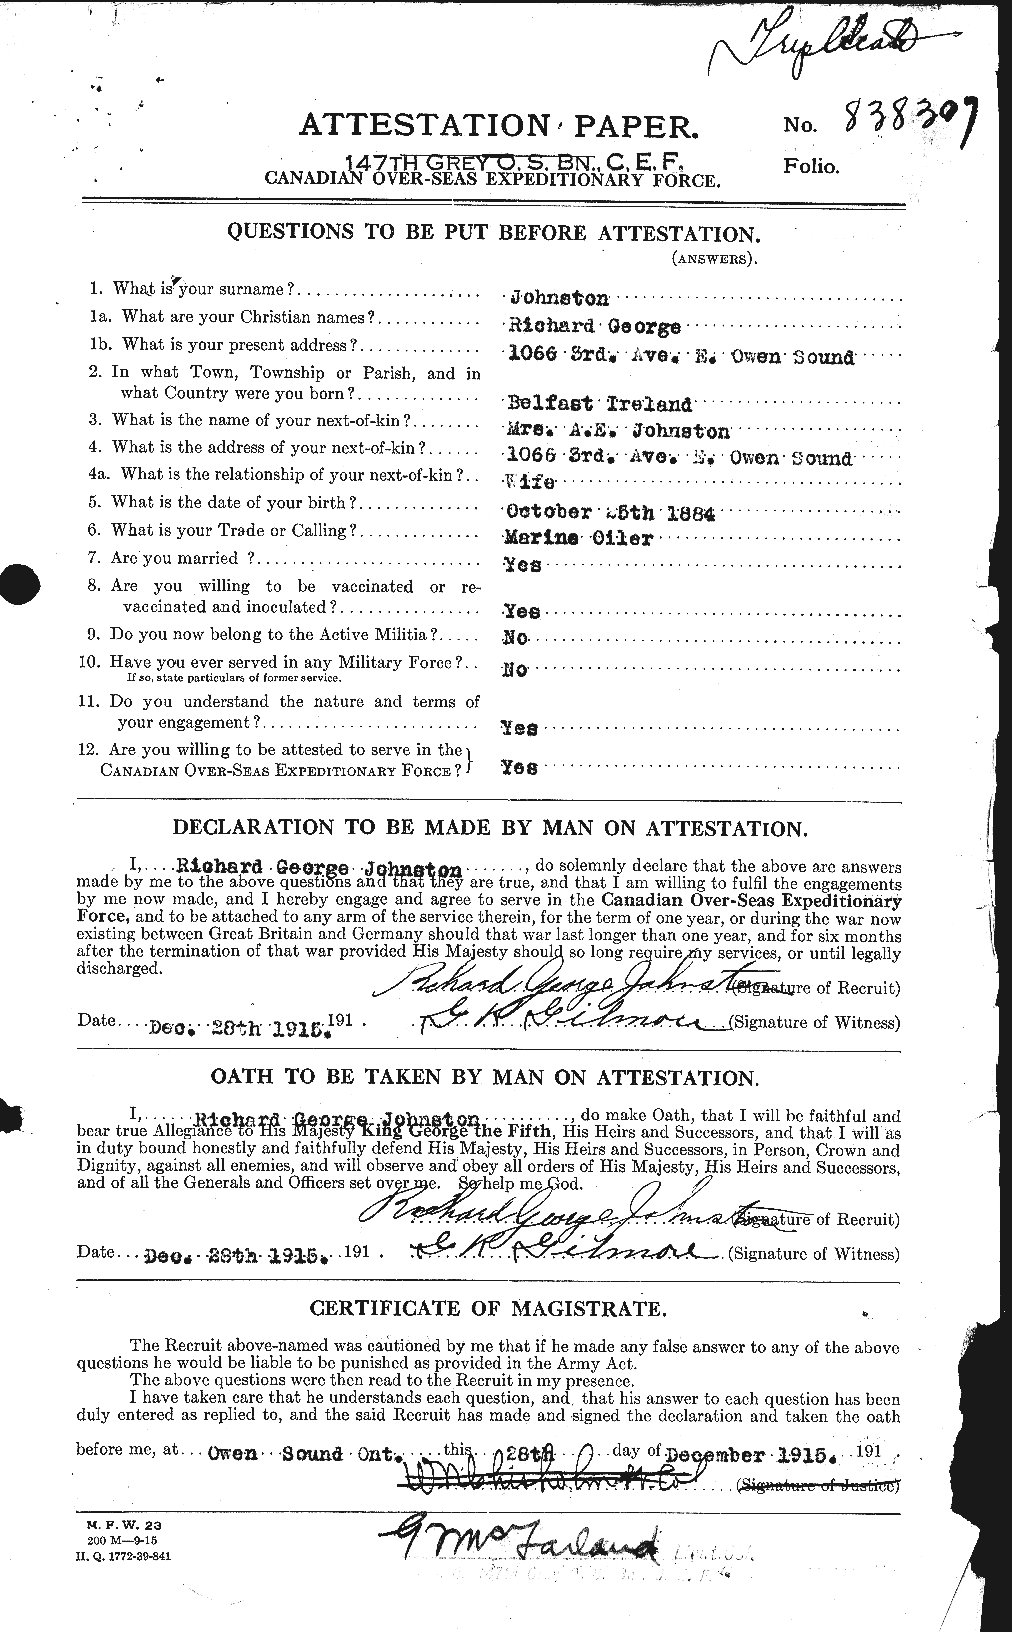 Personnel Records of the First World War - CEF 423070a